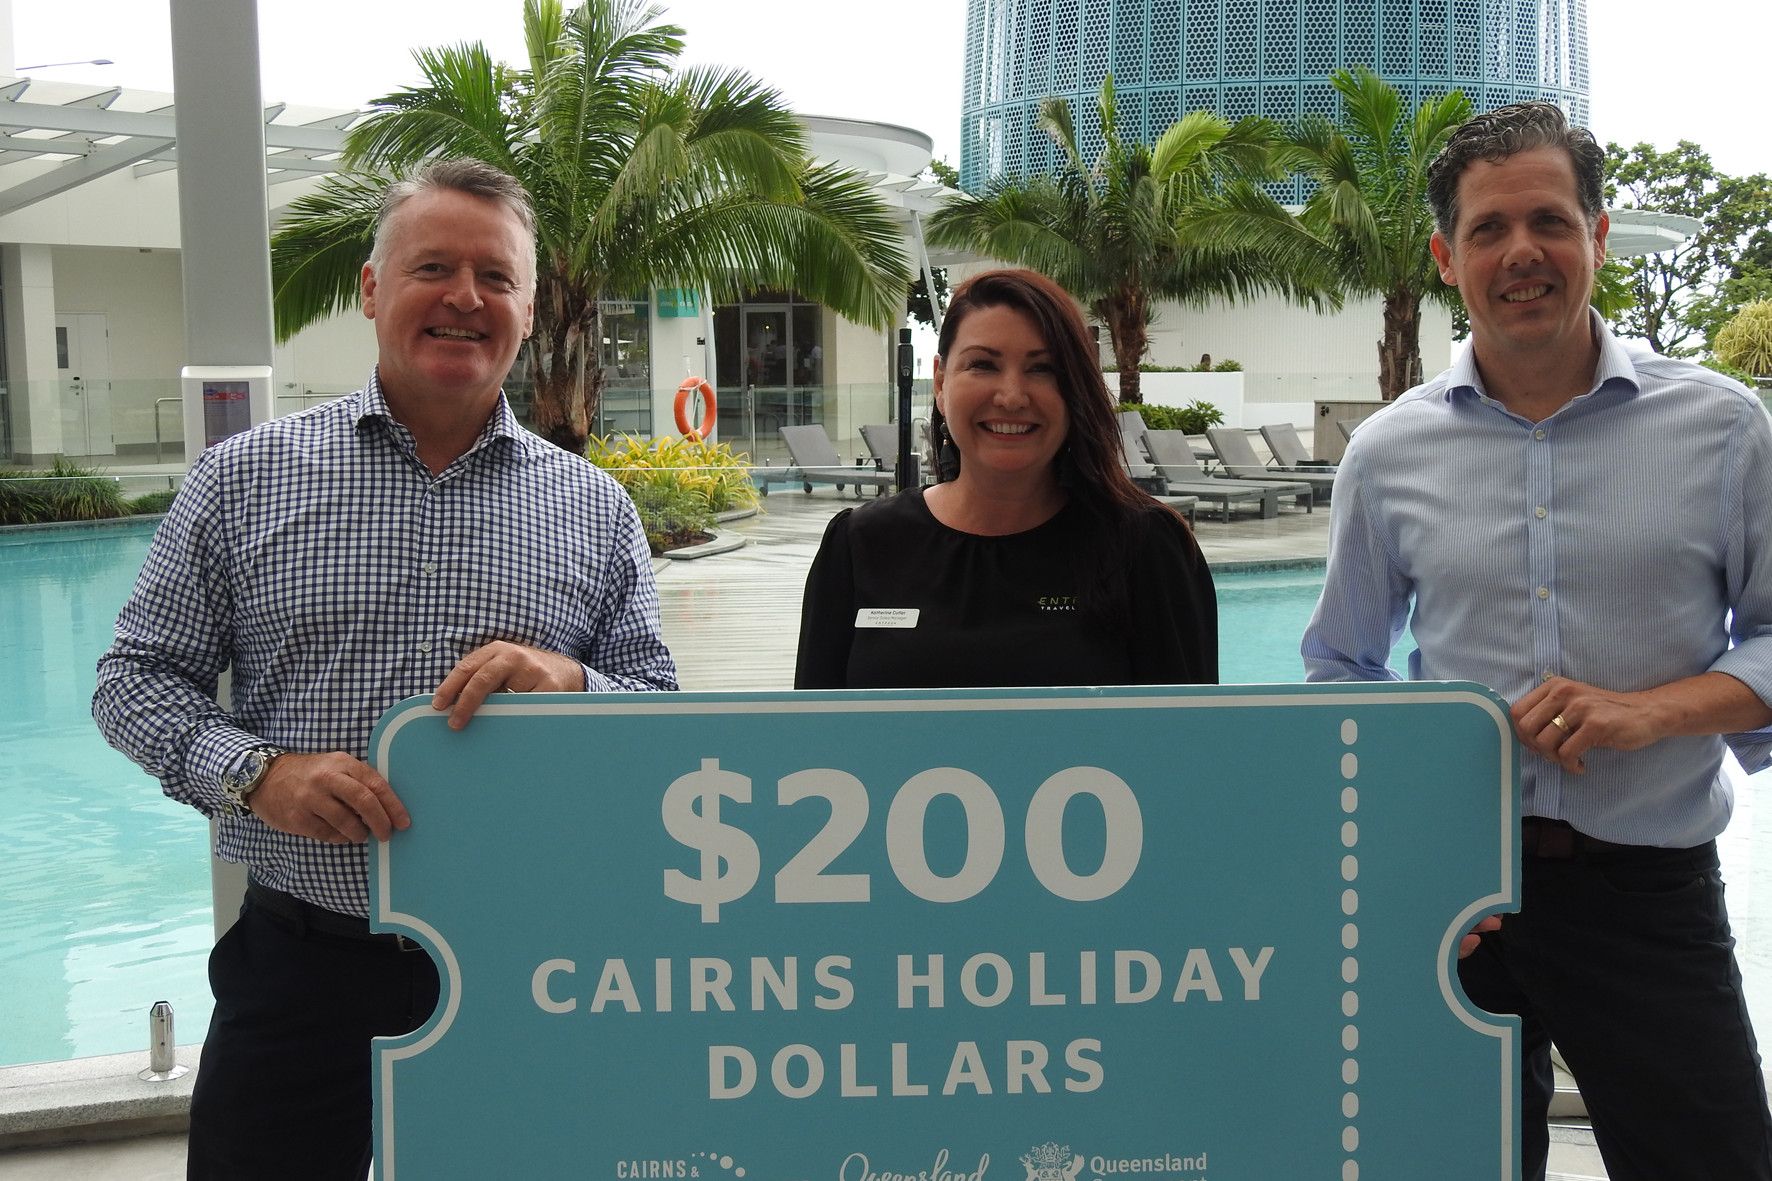 Member for Cairns, Michael Healy, Katherine Cutler Senior Manager Entrada and Marl Olsen, CEO TTNQ